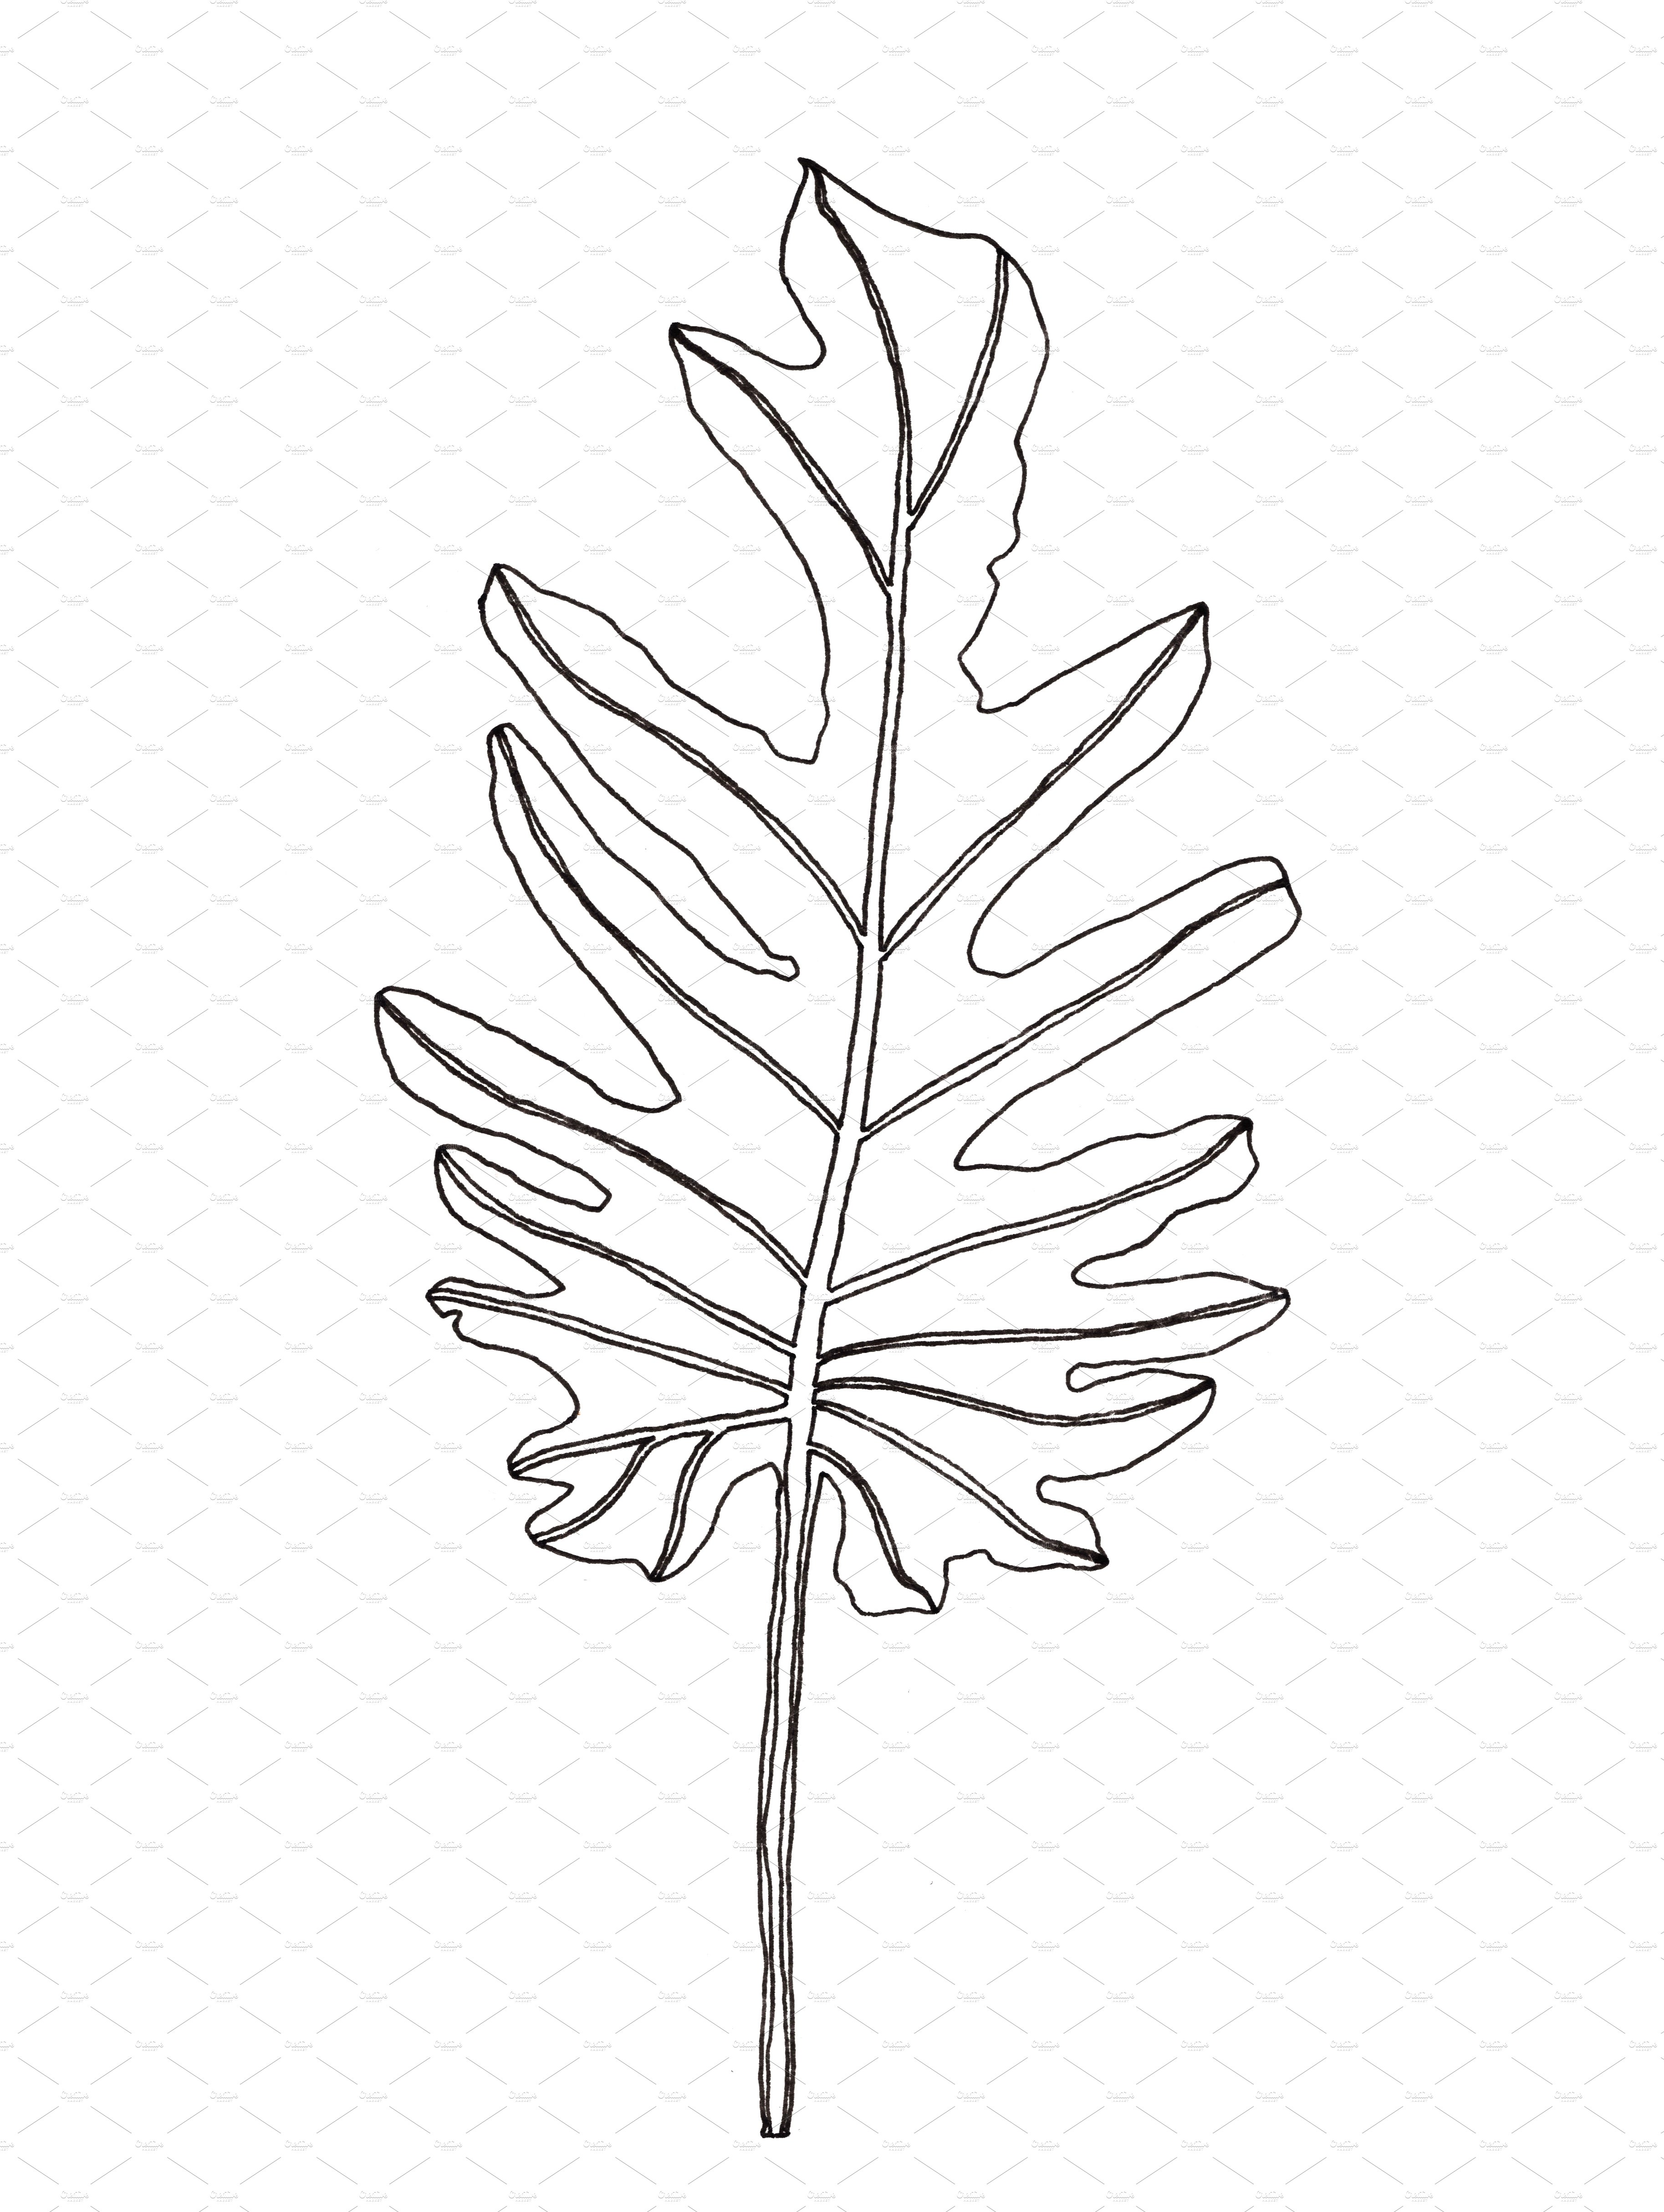 Black and white drawing of a leaf.